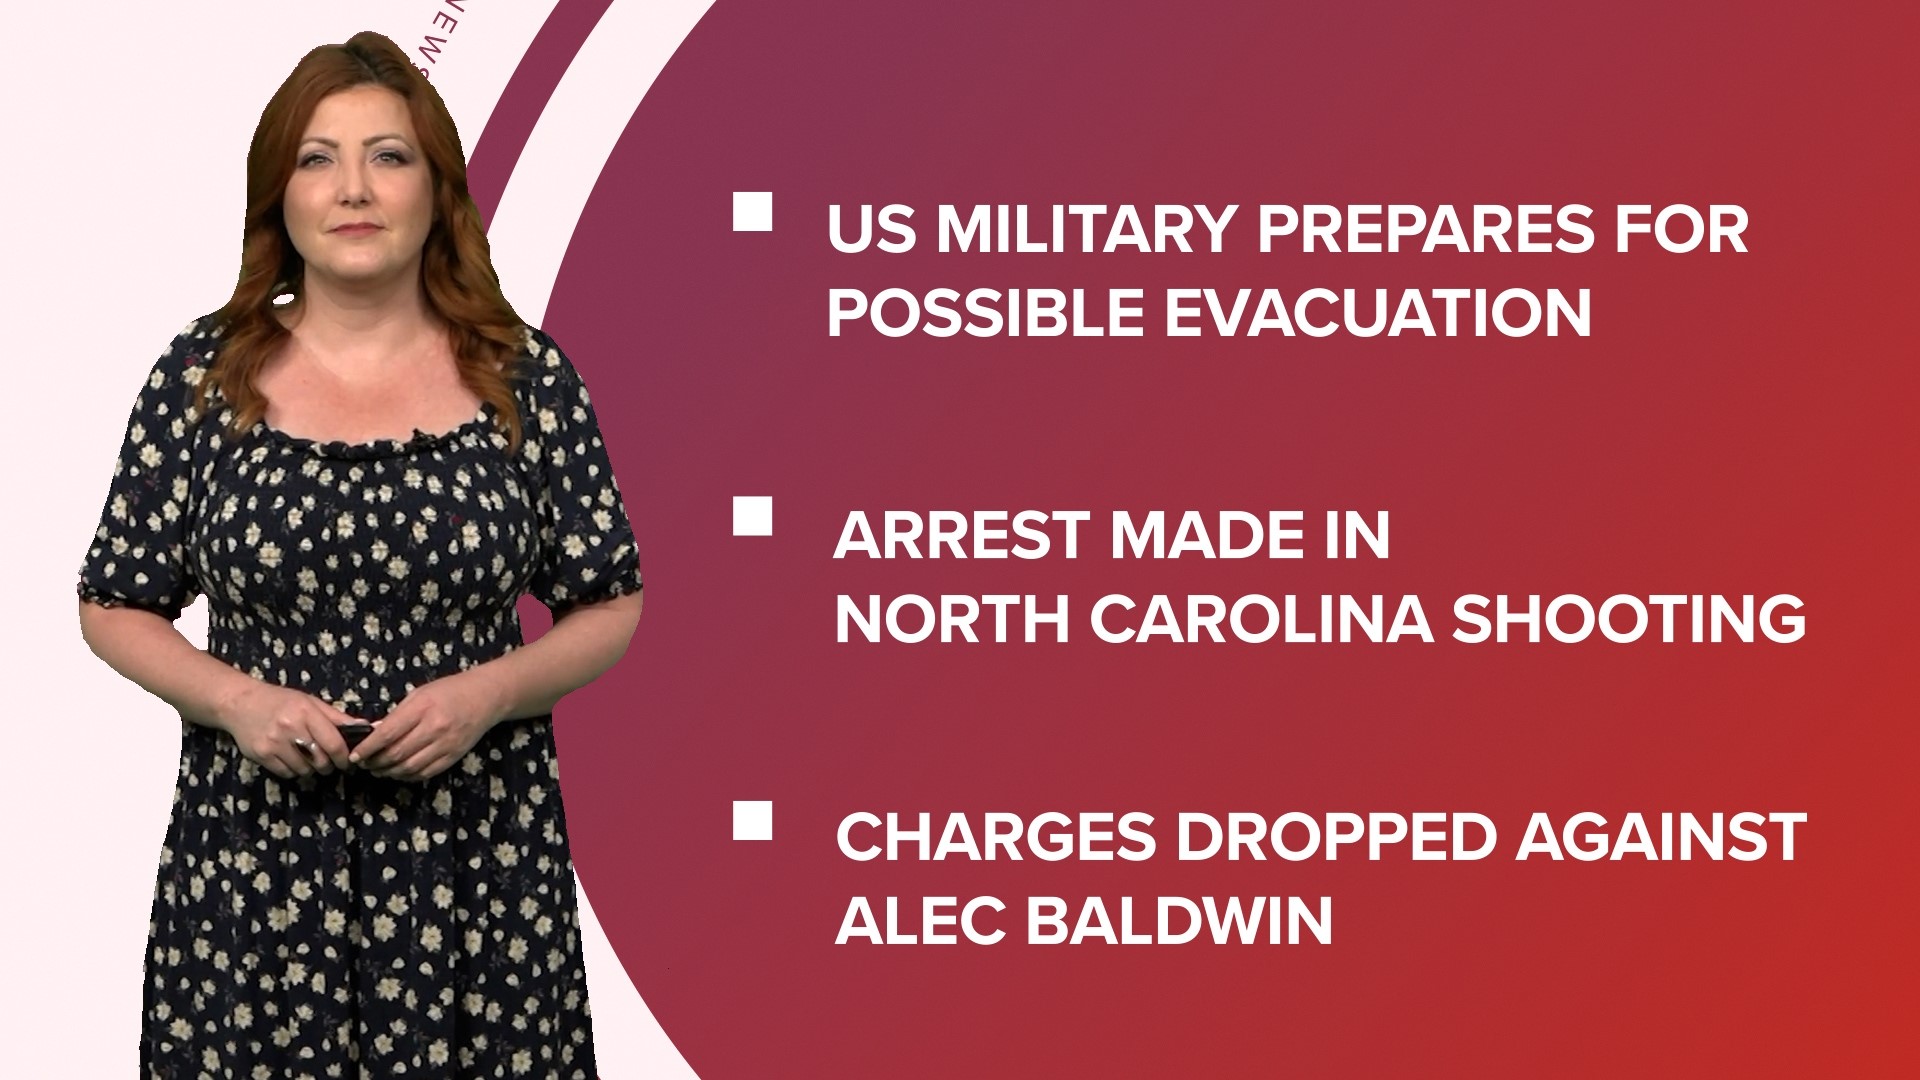 A look at what is happening in the news from US military preparing to evacuate the embassy in Sudan to preparing for Earth Day and a new 'Twilight' TV series.